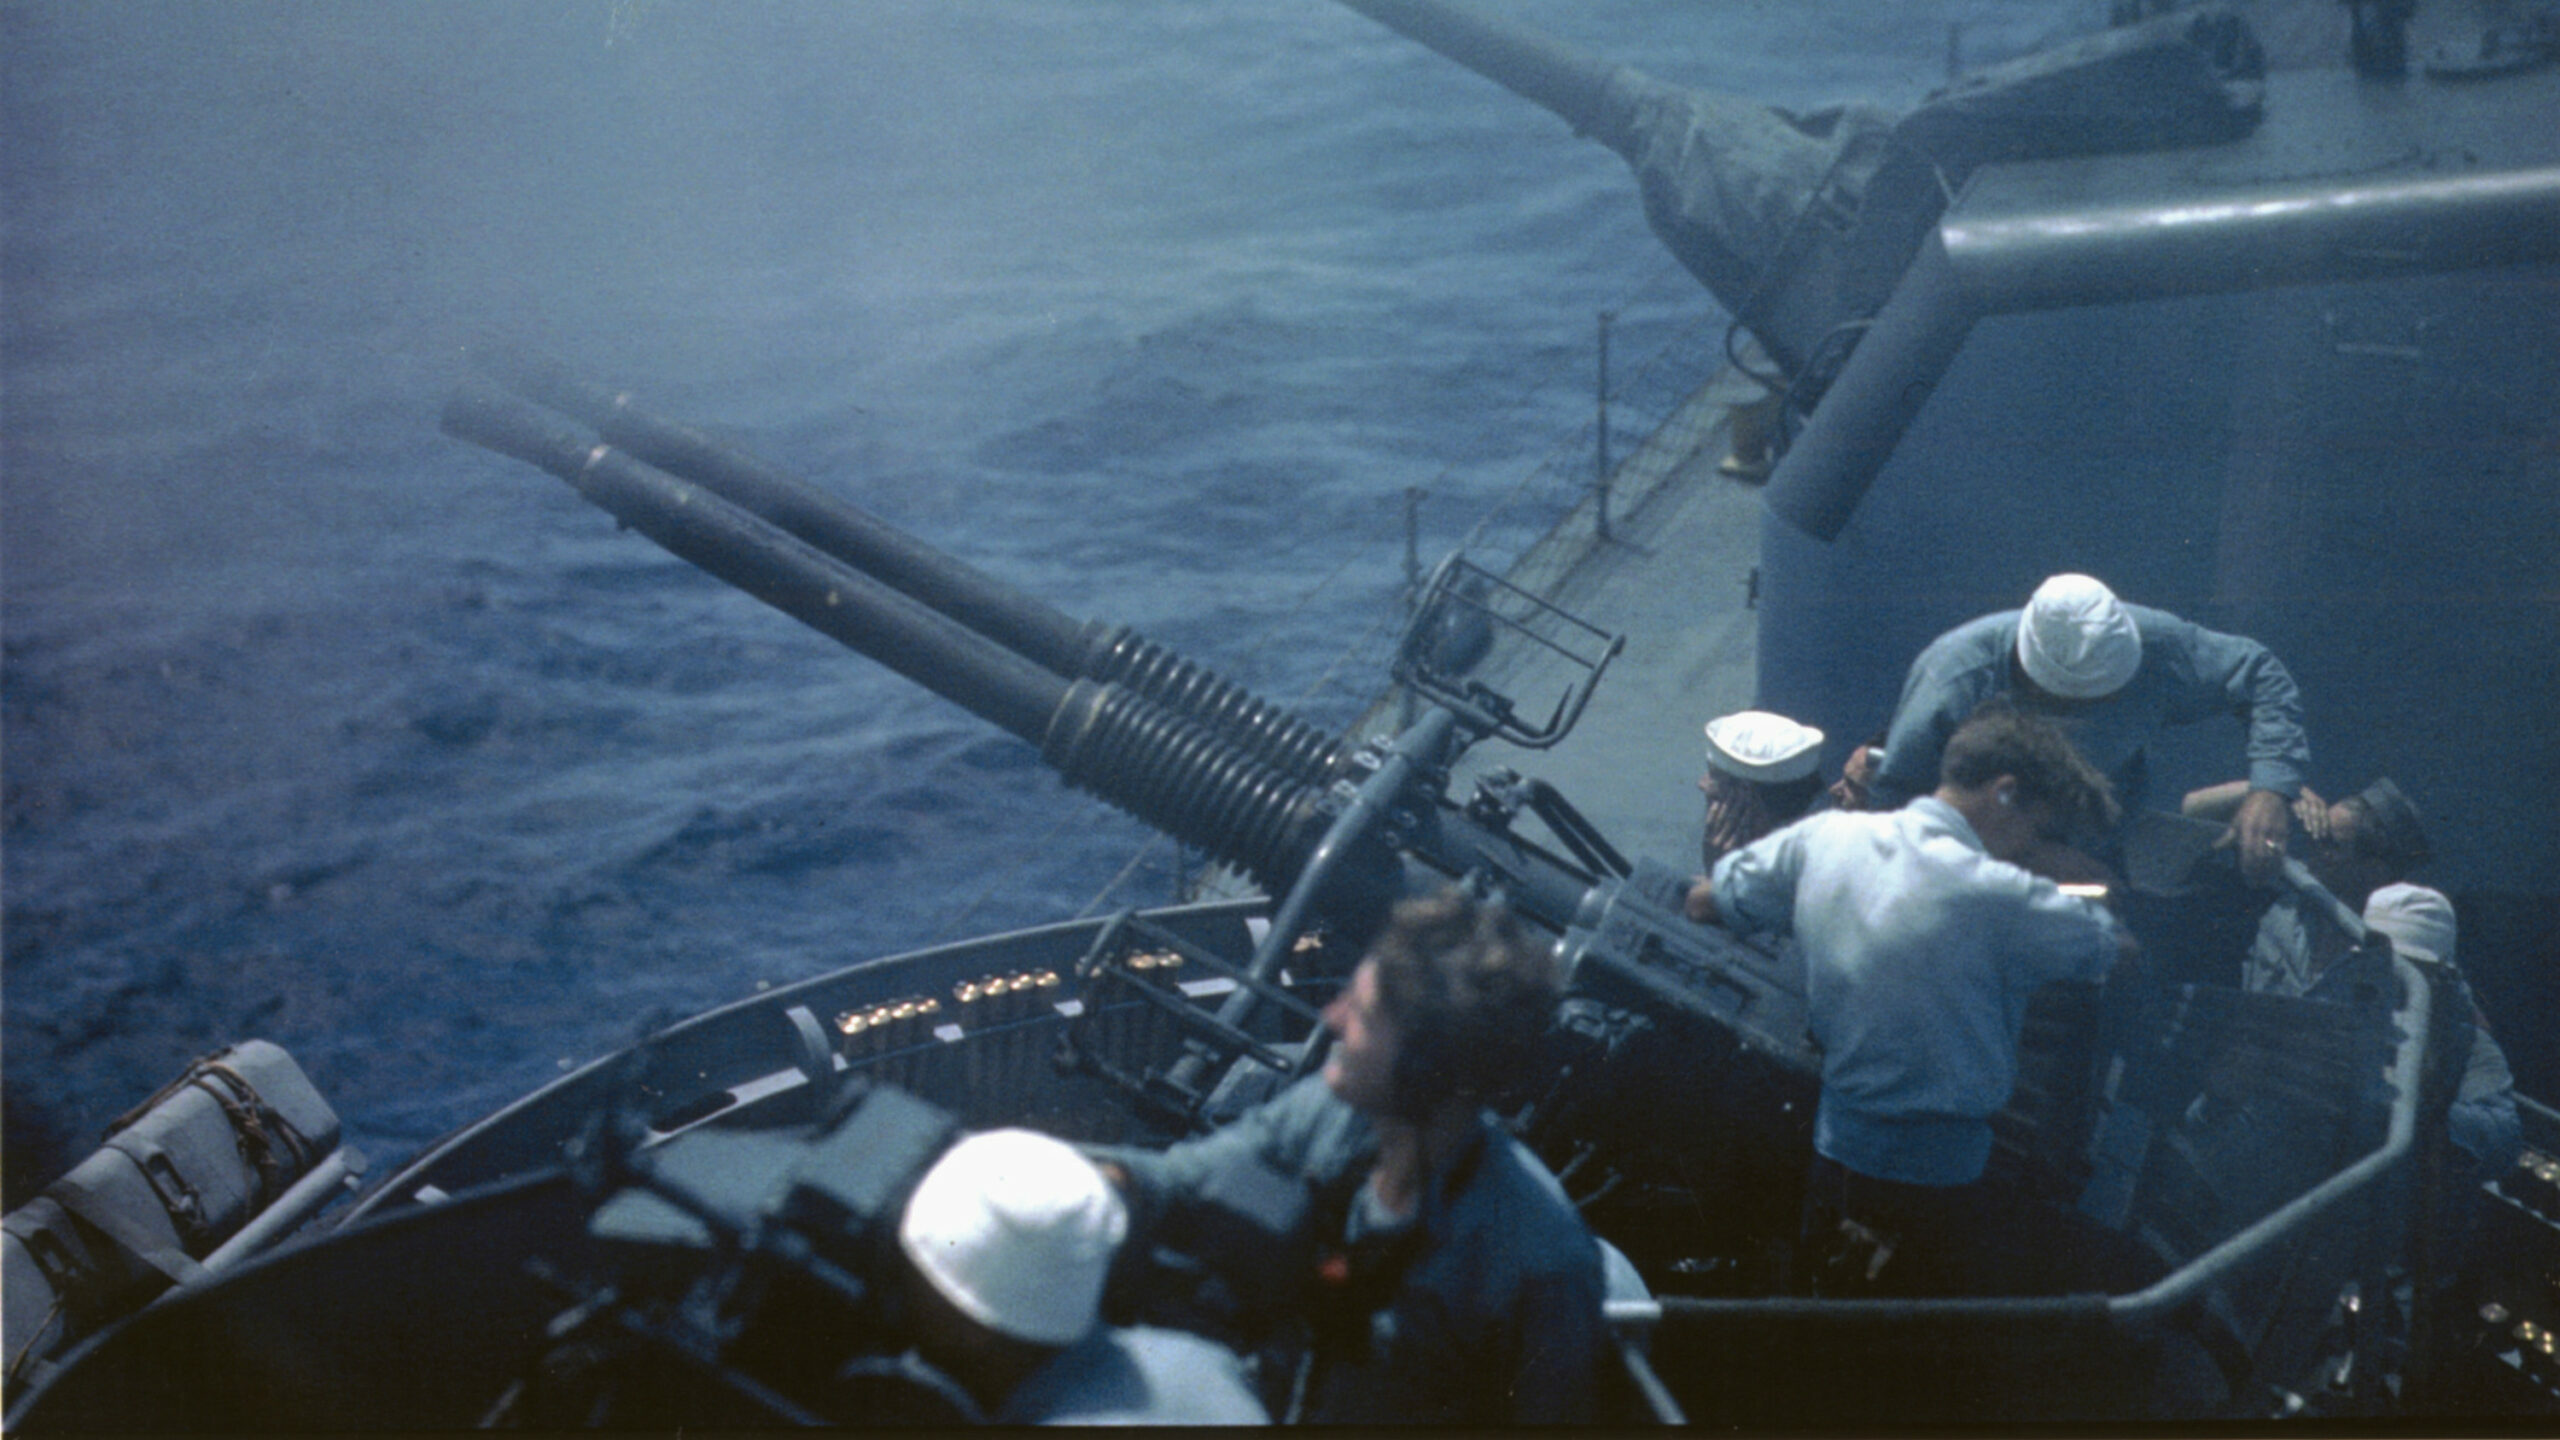 Crewmen service the quad mounted 40mm cannon aboard a U.S. Navy destroyer escort. A 5-inch gun turret is visible in the background.